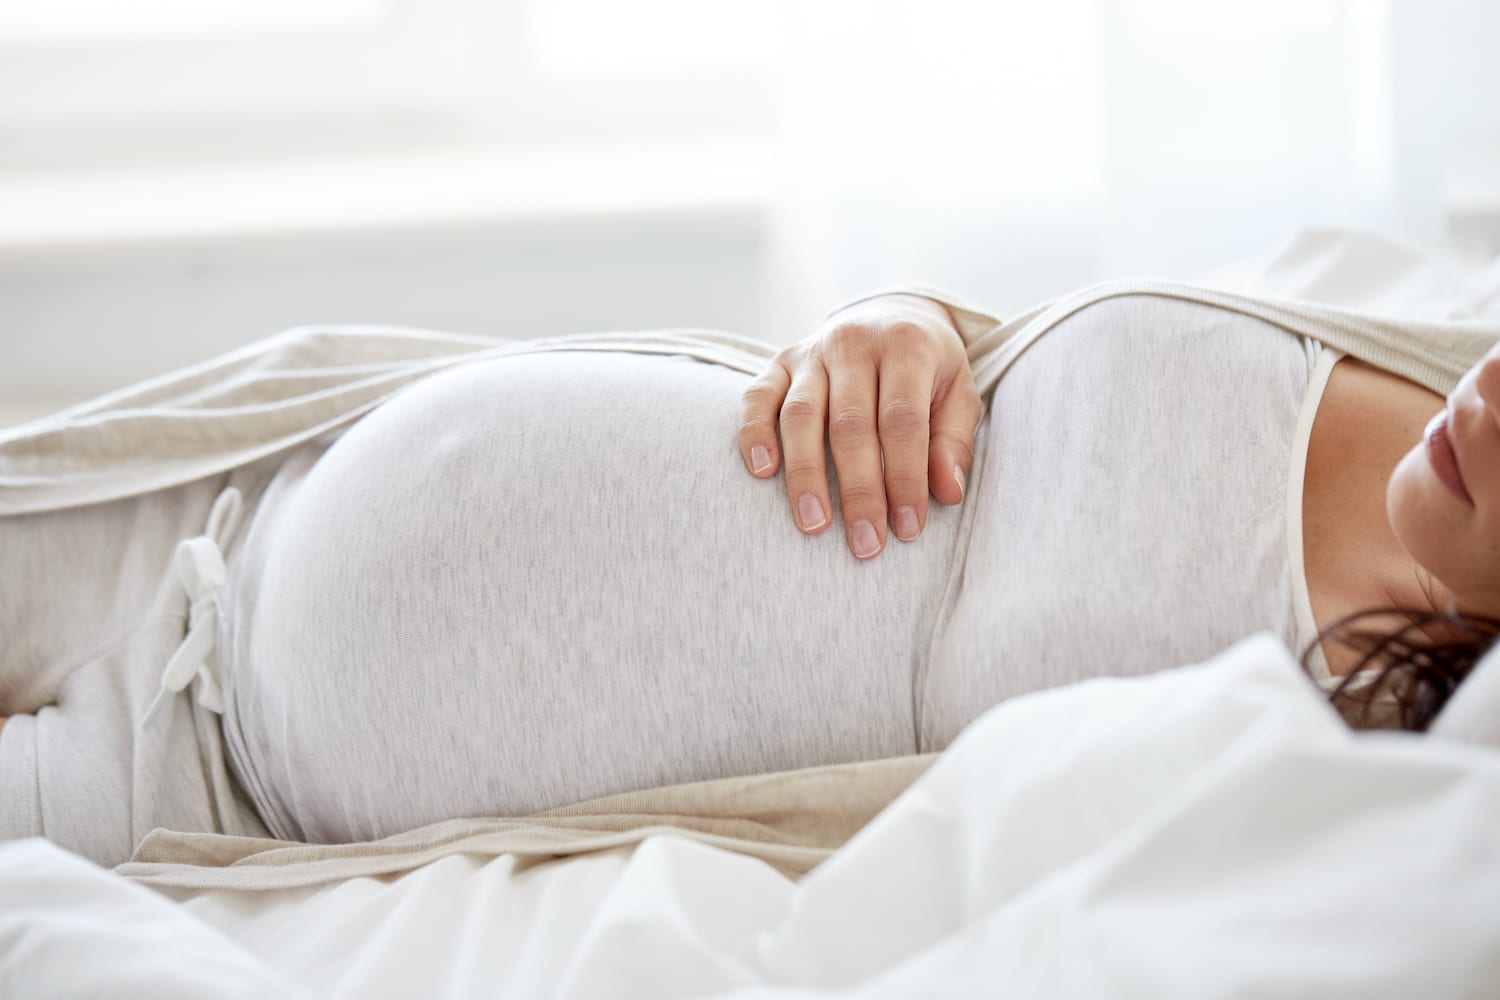 Discomfort During Pregnancy: Tips For Feeling Good While Pregnant